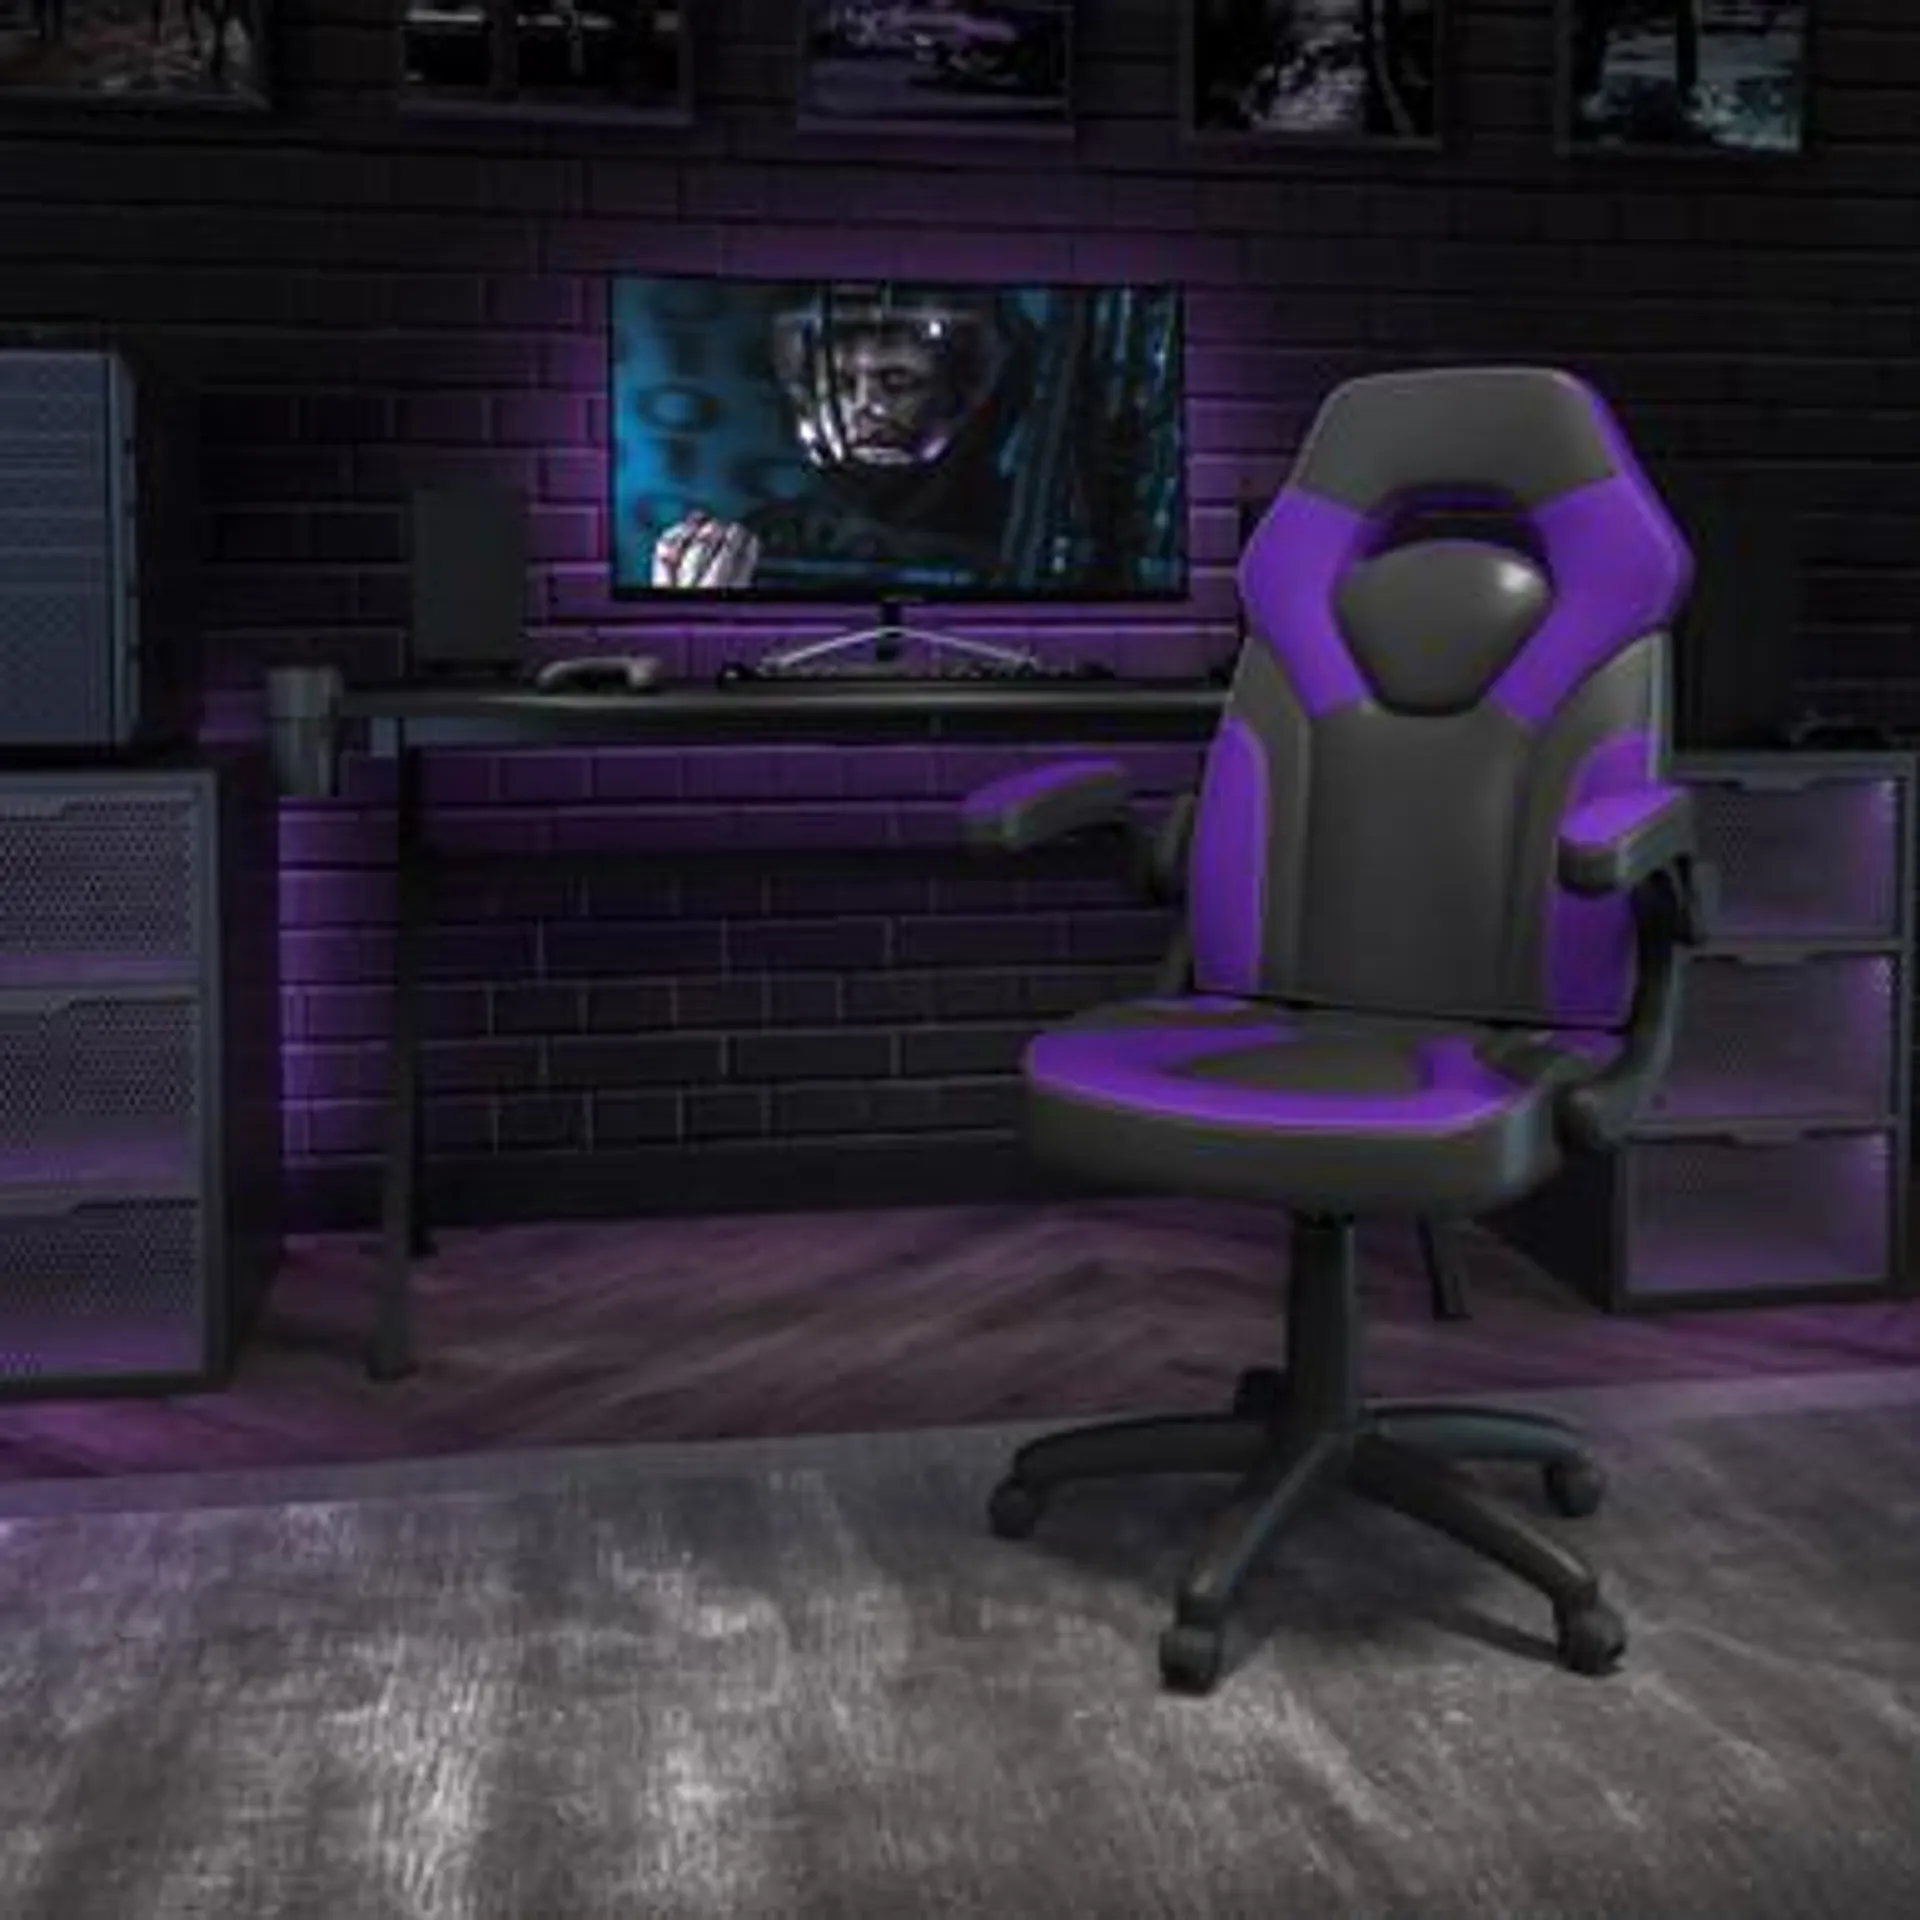 X10 Gaming Chair Racing Ergonomic Computer PC Adjustable Swivel Chair with Flip-up Arms, Purple/Black LeatherSoft